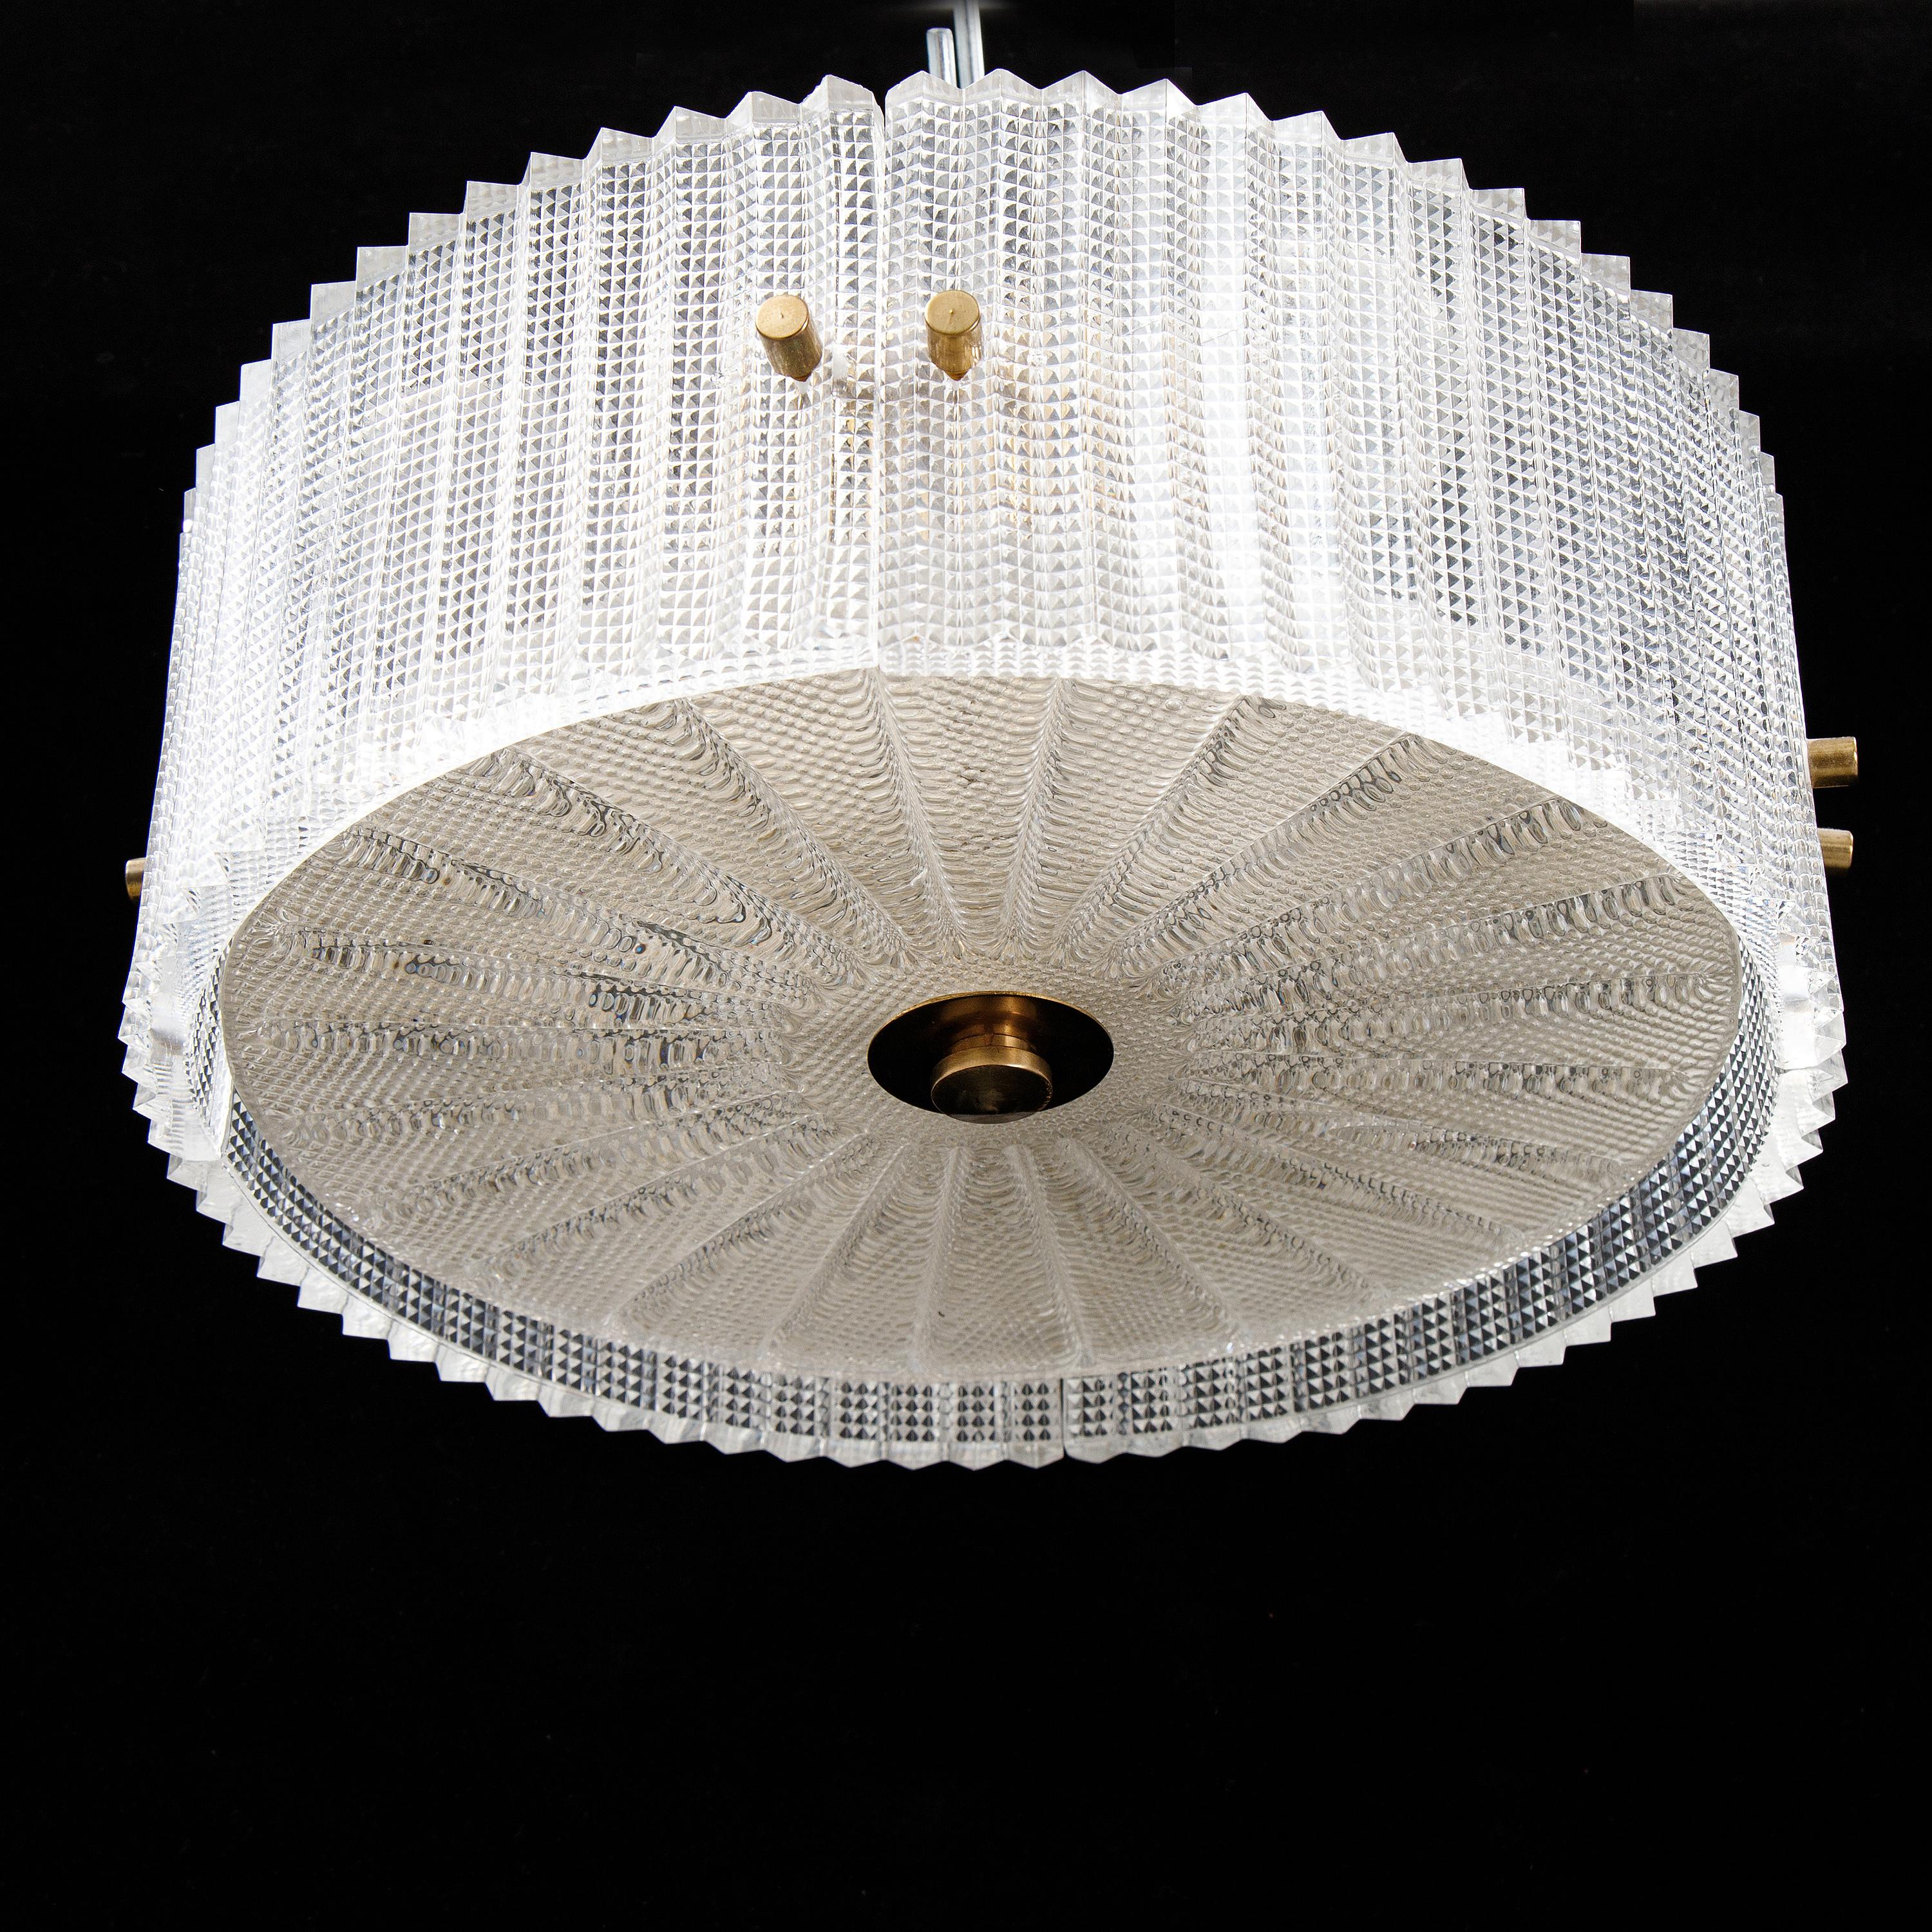 Mid-Century Modern Carl Fagerlund Ceiling Light for Orrefors Glass and Brass, Sweden, 1960 For Sale